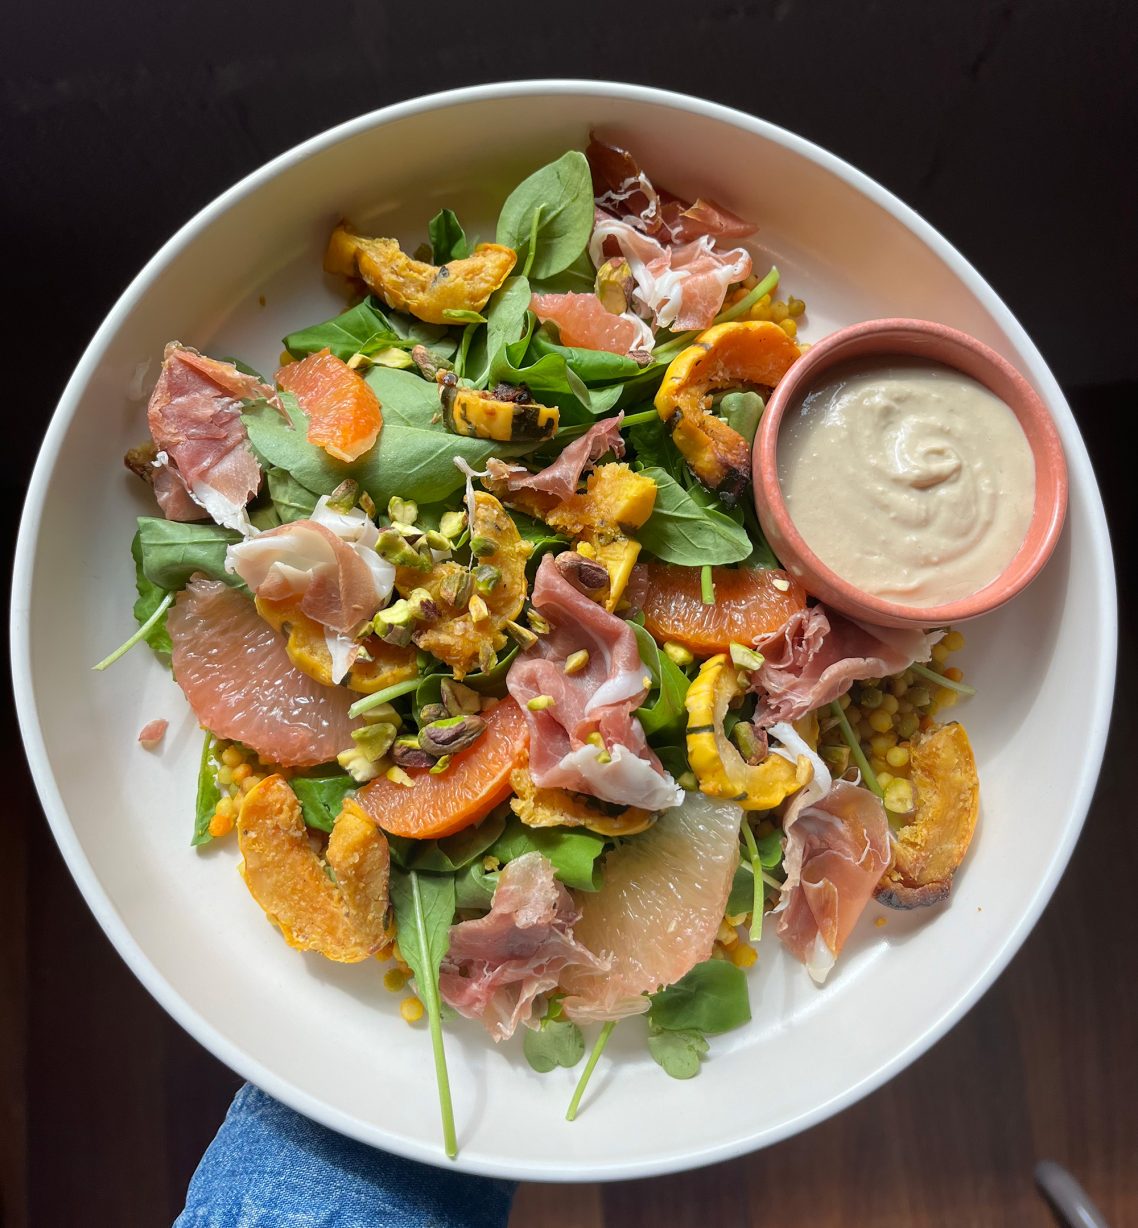 A ceramic bowl filled with greens, orange slices and ham